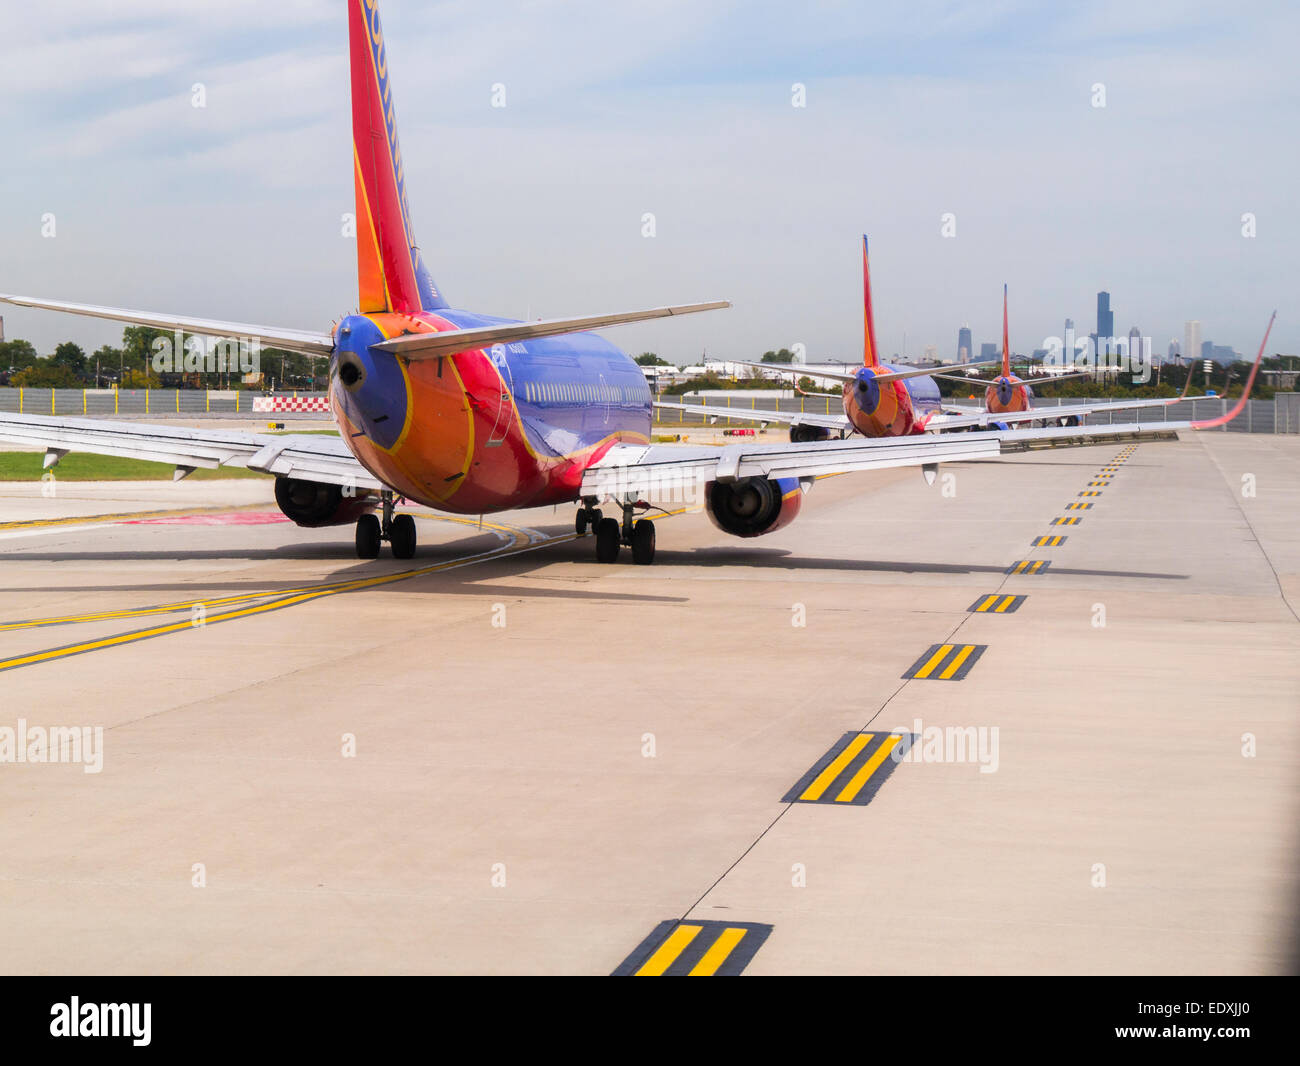 Passenger jets lined up on taxiway for takeoff at Chicago Midway Airport Stock Photo